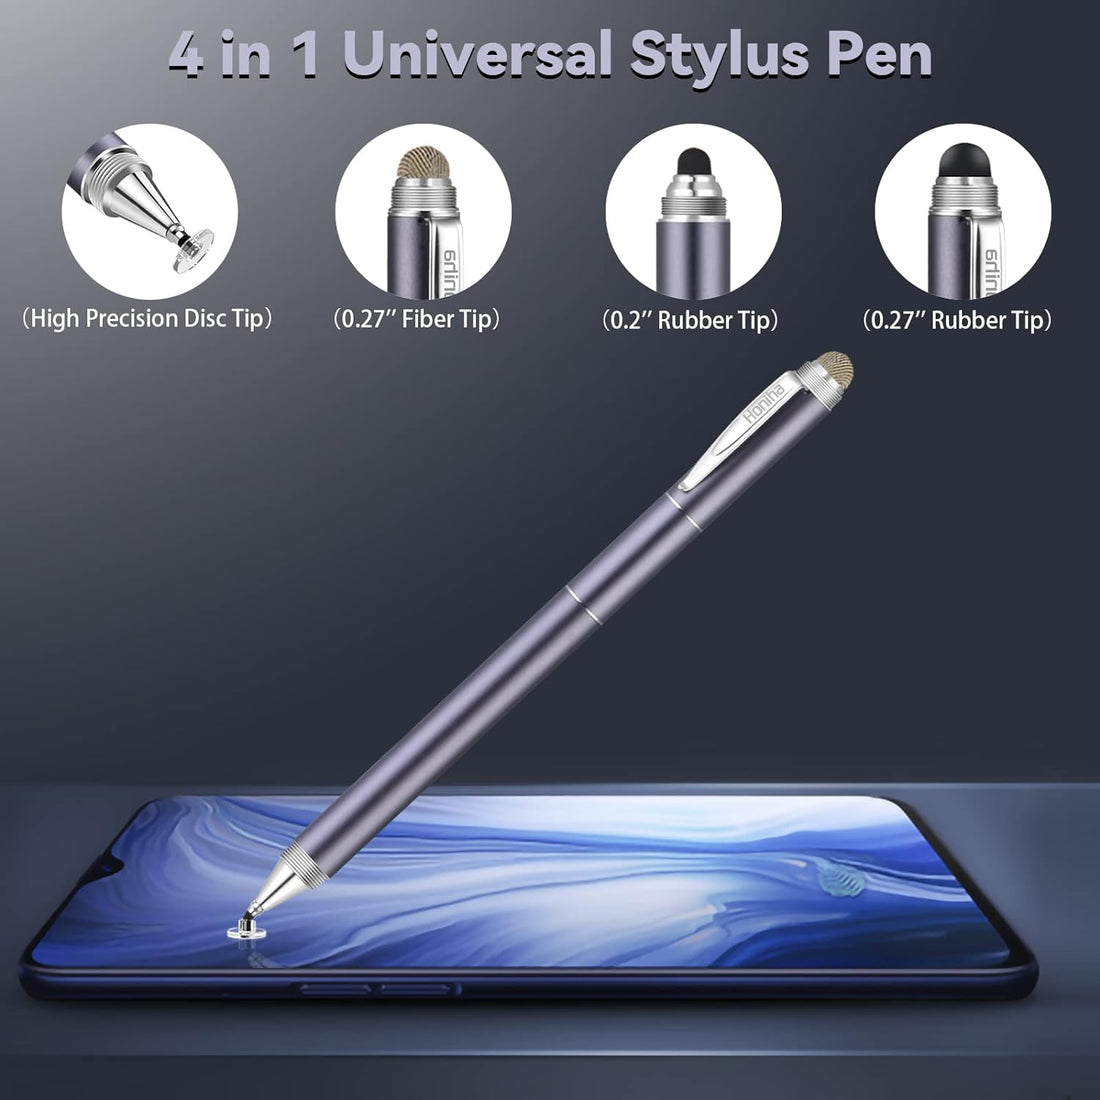 Universal Stylus Pens, Honiha High Precise Disc Stylus Pens for Touch Screens 4 in 1 Touch Screen Pen Capacitive Stylus Compatible with iPad, iPhone, Samsung, Android, Microsoft Tablets- Space Black